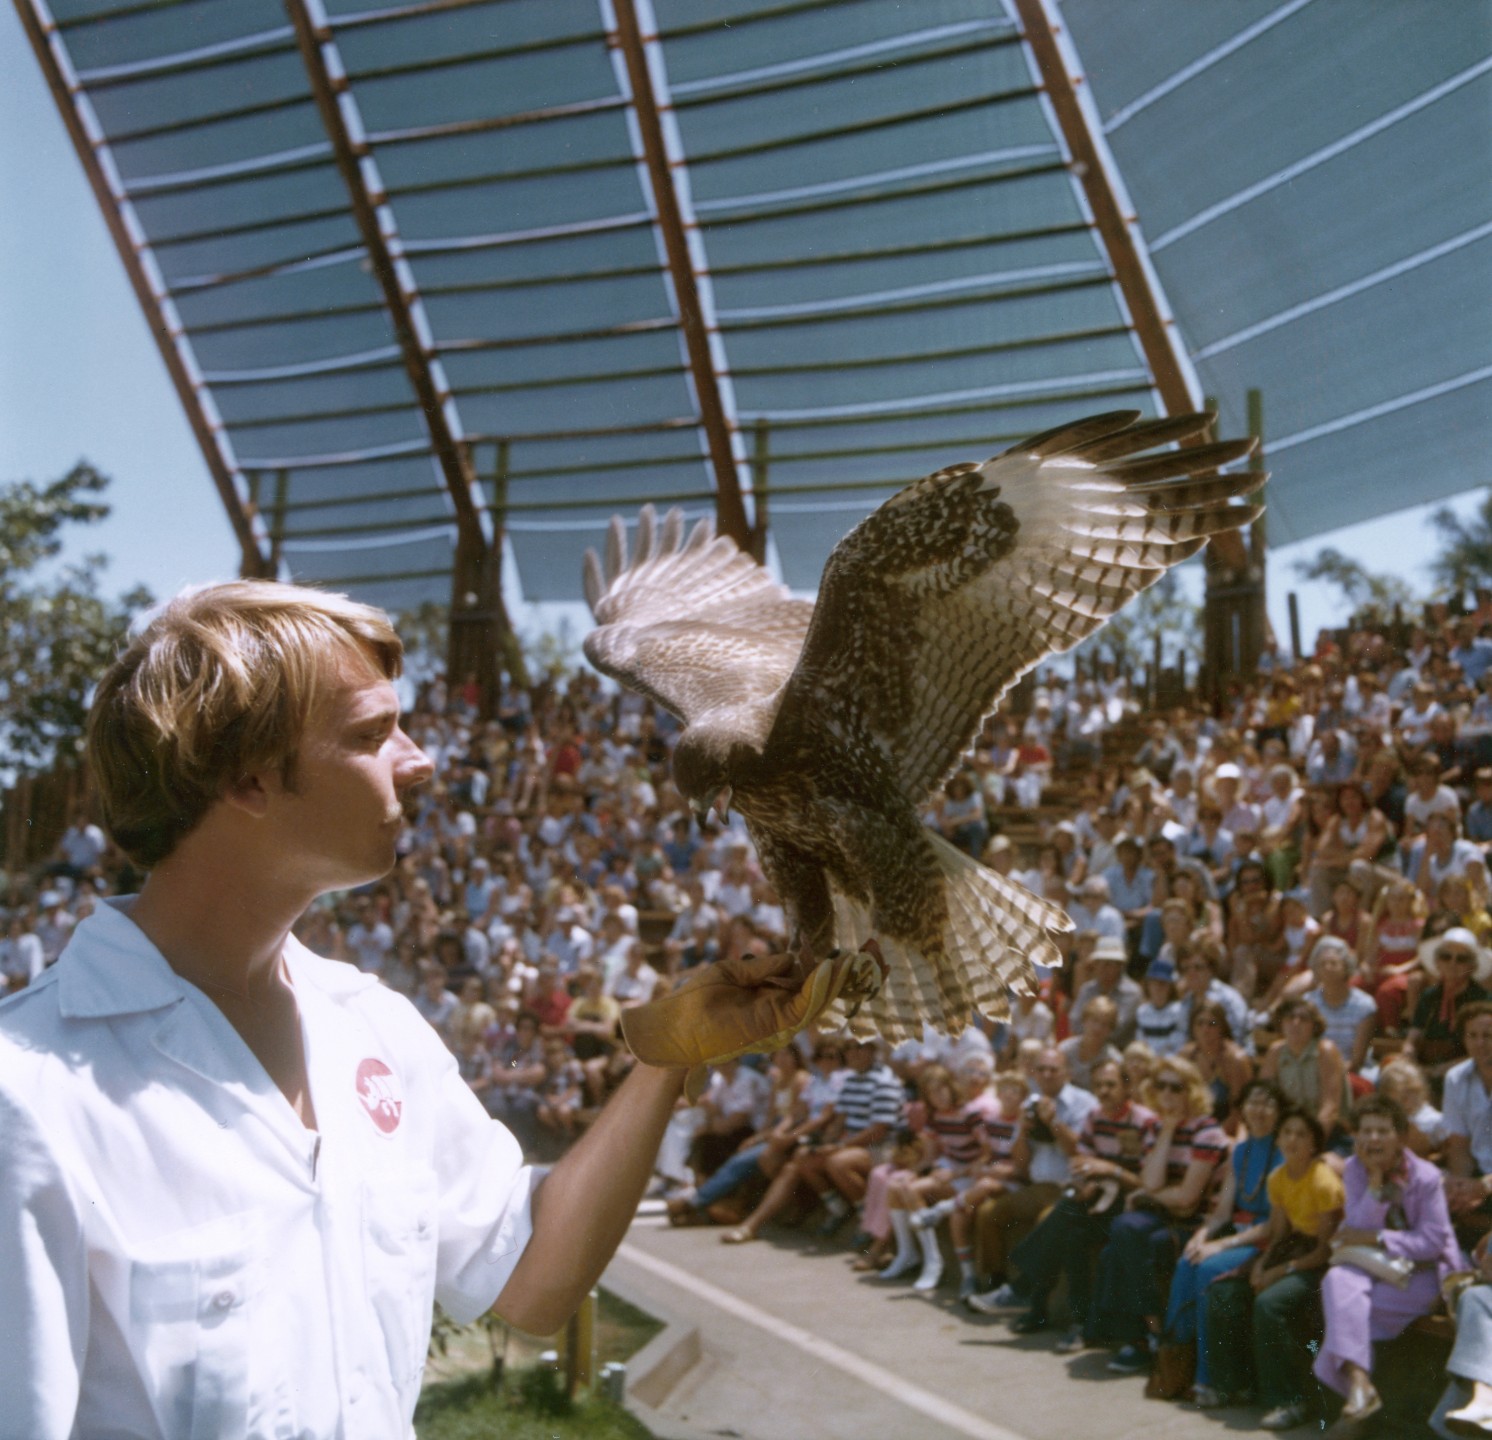 Ebony the red-tailed hawk spreads her wings for the audience, after coming in for a landing after being released from a balloon 500 feet above the Park.